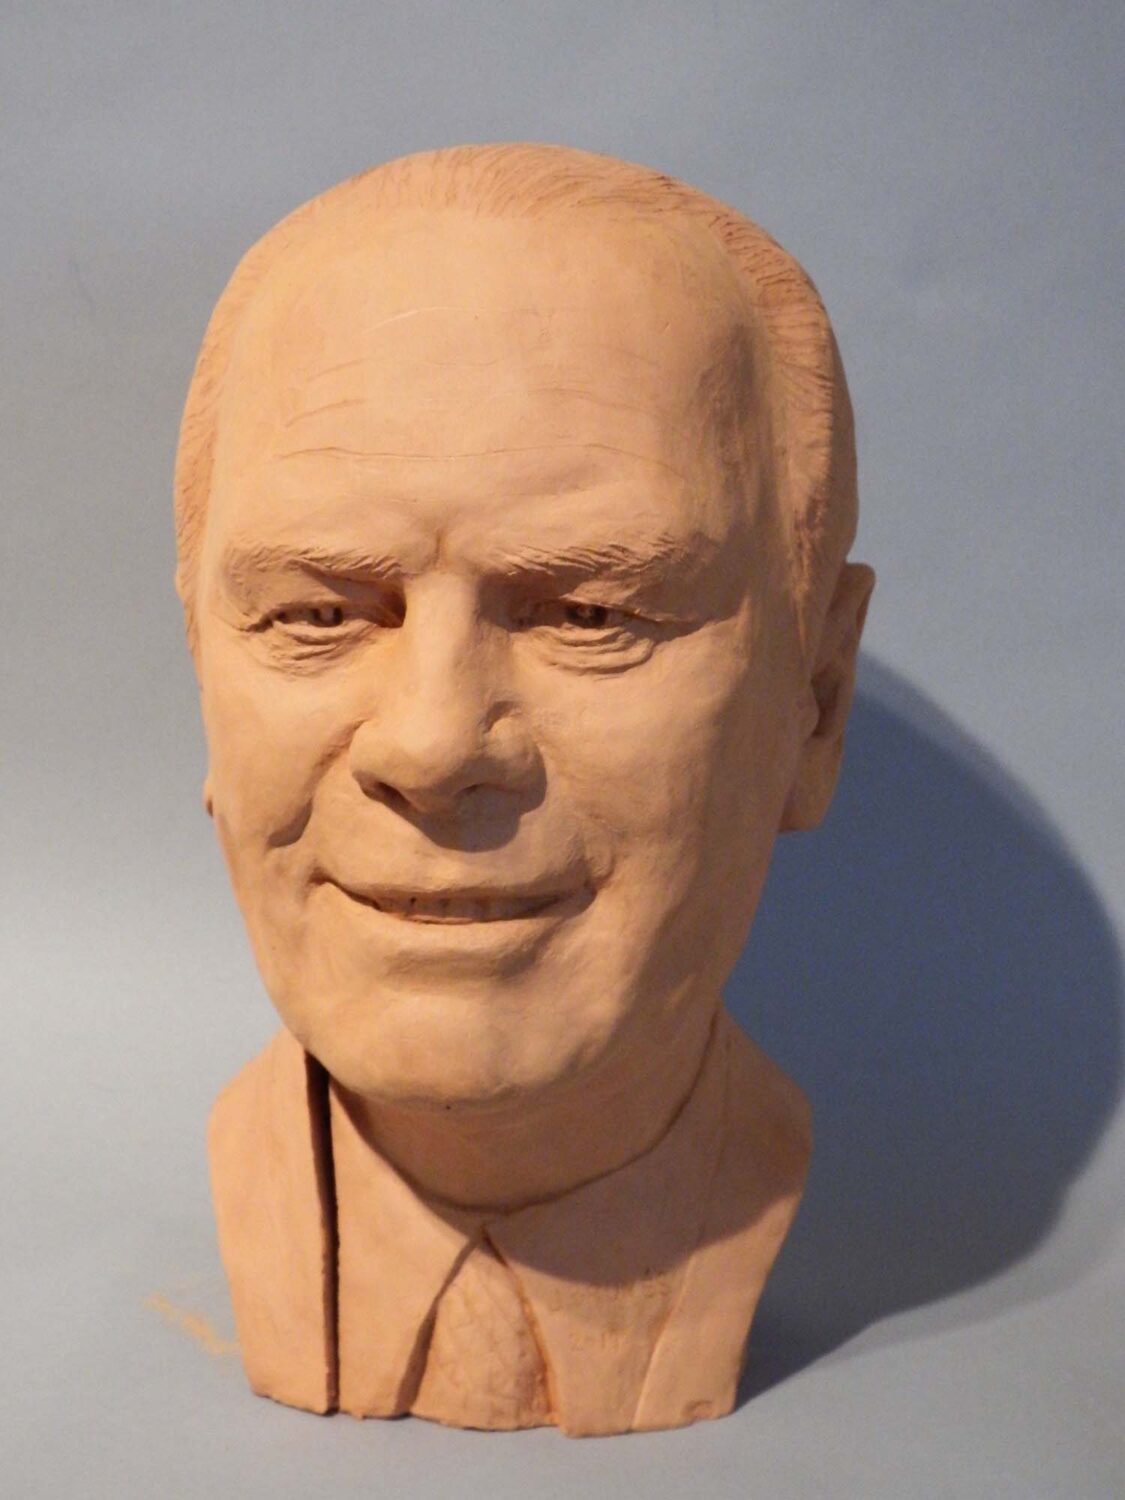 thumbnail of Sculpture of Gerald Ford made out of Terra cotta.